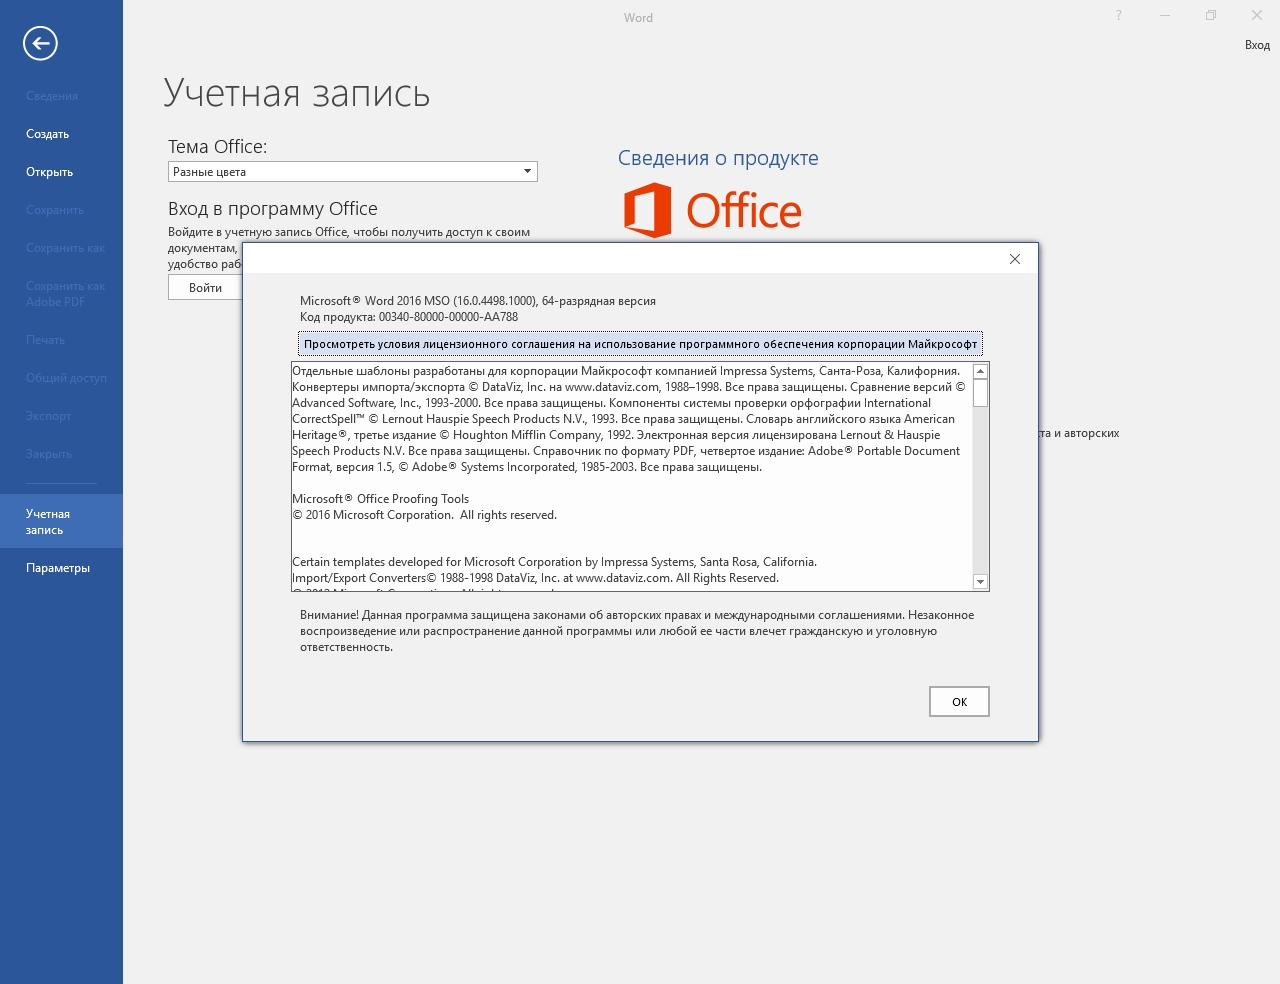 Microsoft Office 2016 Permanent Activator Ultimate 1.7 - CrackzSoft q Microsoft Office 2016 Permanent Activator Ultimate 1.7 - CrackzSoft